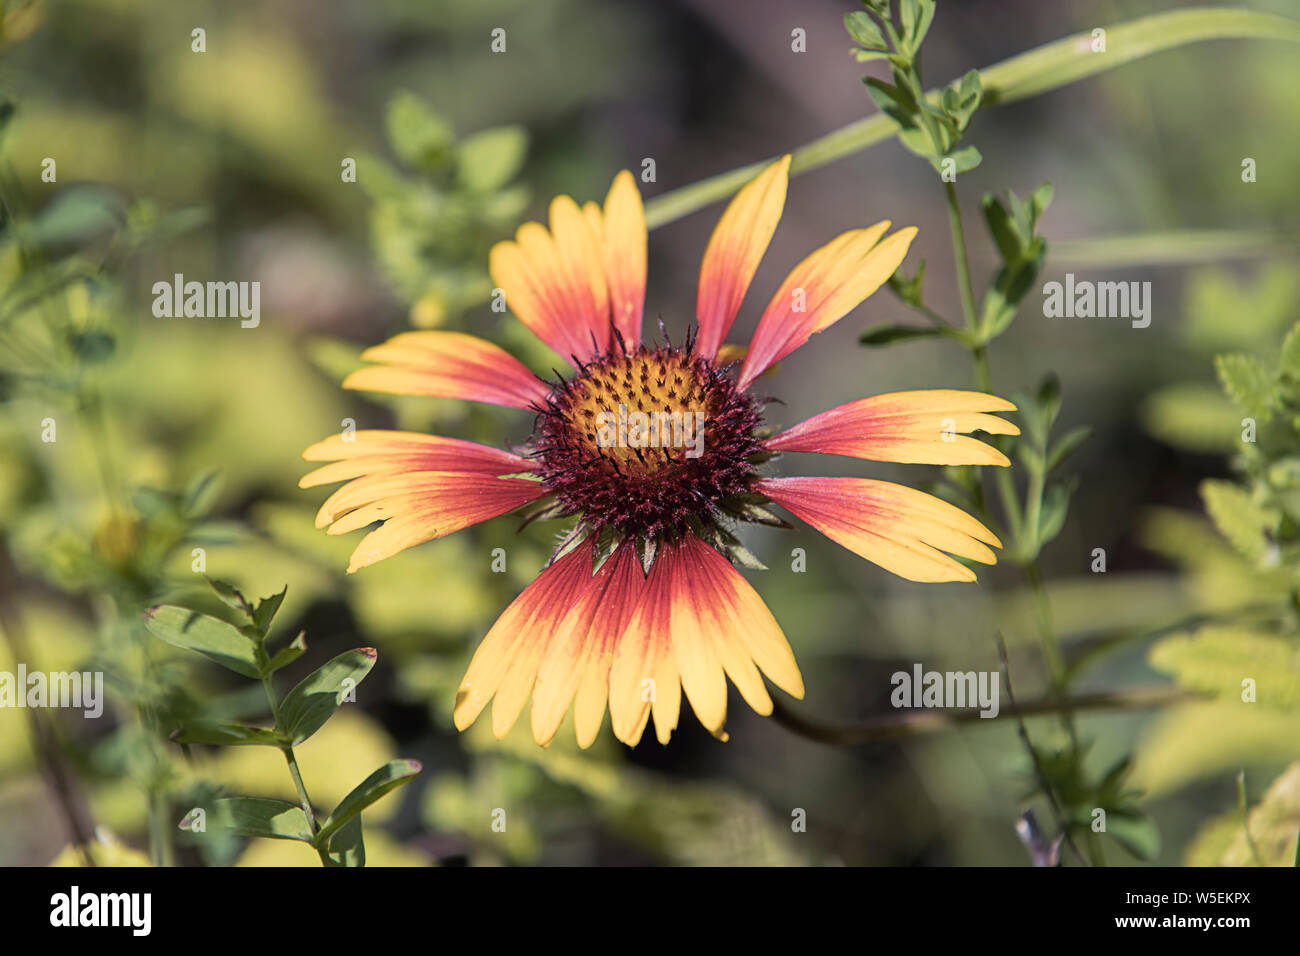 A close up photo of a delicate red and yellow coneflower in a garden. Stock Photo